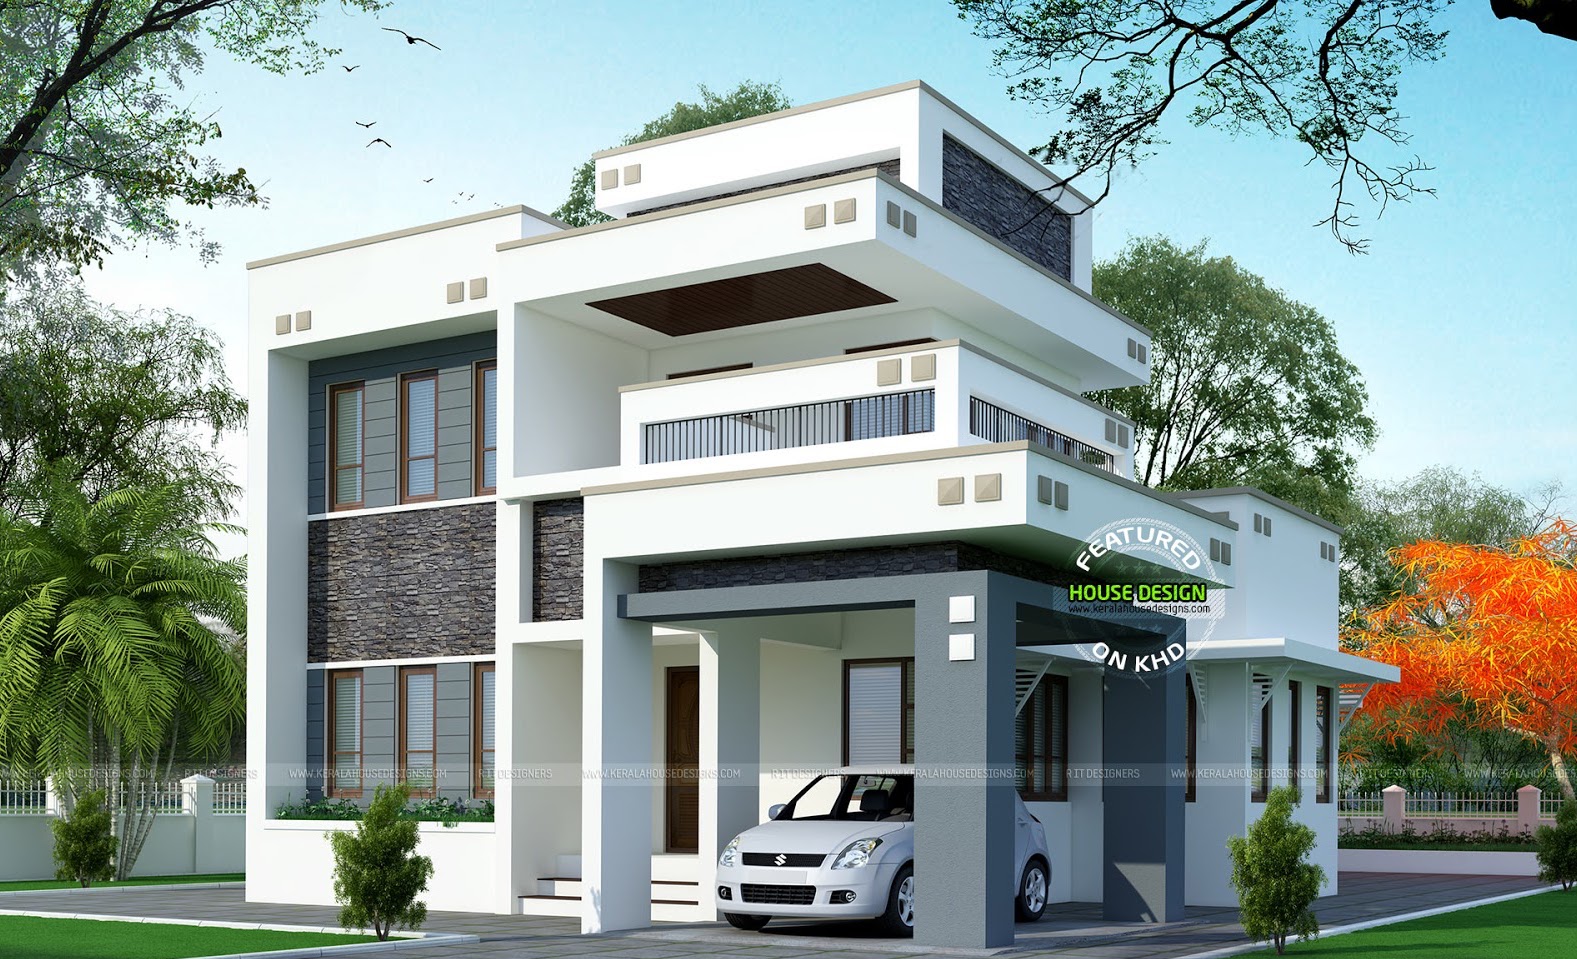 A three bedroom home combines versatility and function. [Image Credit: Kerala House Designs]